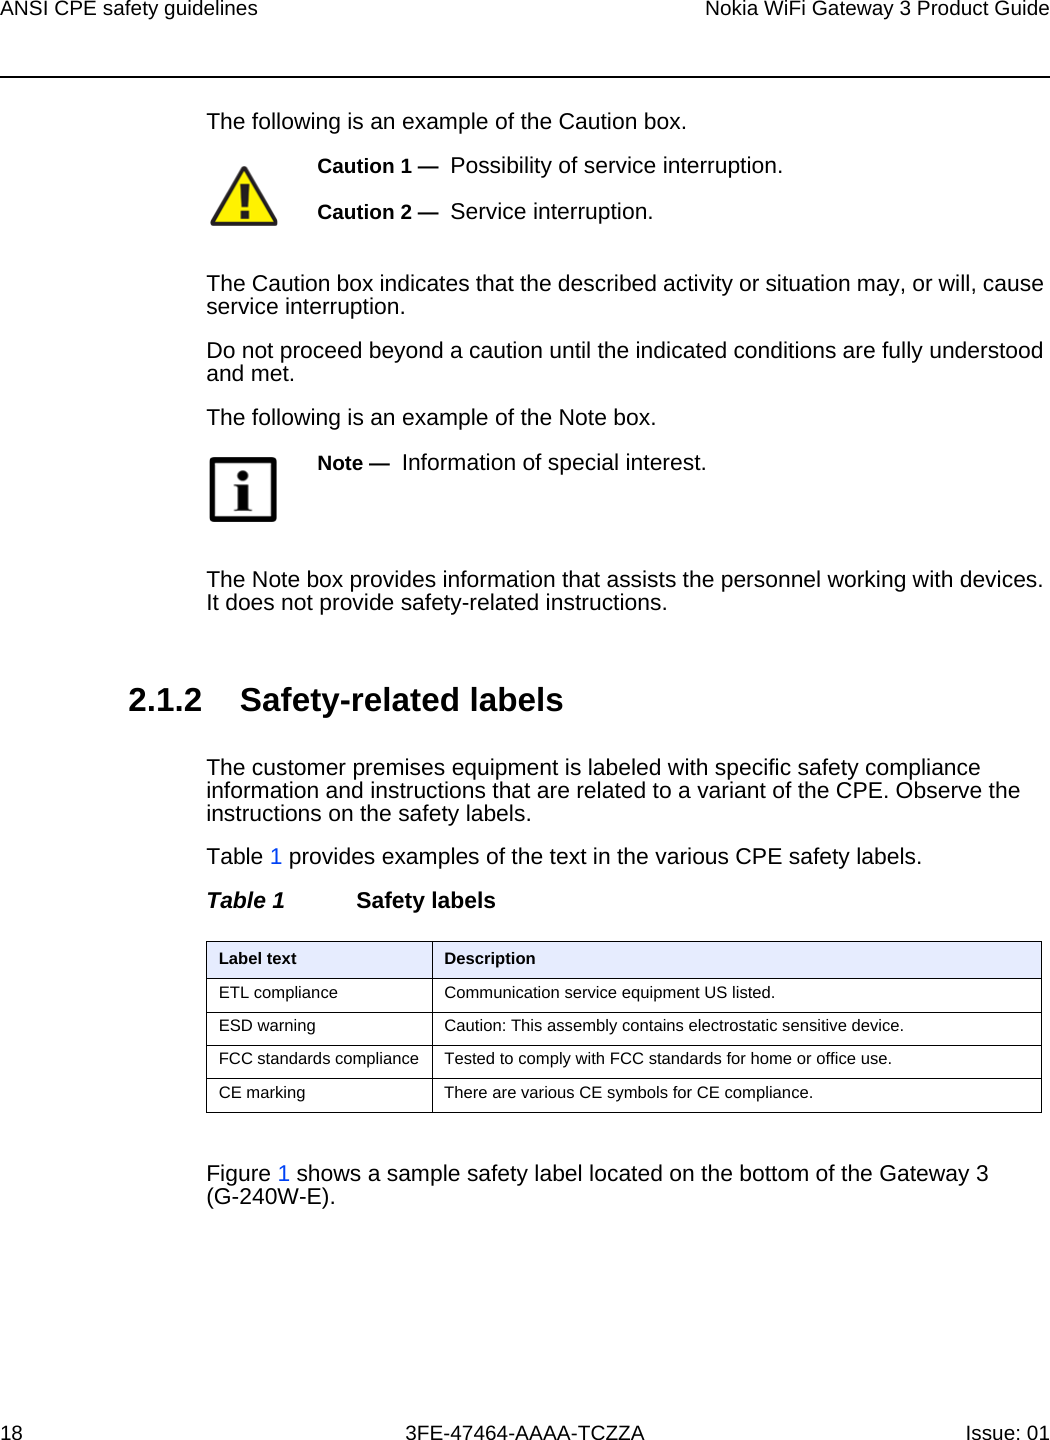 ANSI CPE safety guidelines18Nokia WiFi Gateway 3 Product Guide3FE-47464-AAAA-TCZZA Issue: 01 The following is an example of the Caution box.The Caution box indicates that the described activity or situation may, or will, cause service interruption.Do not proceed beyond a caution until the indicated conditions are fully understood and met.The following is an example of the Note box.The Note box provides information that assists the personnel working with devices. It does not provide safety-related instructions.2.1.2 Safety-related labelsThe customer premises equipment is labeled with specific safety compliance information and instructions that are related to a variant of the CPE. Observe the instructions on the safety labels.Table 1 provides examples of the text in the various CPE safety labels.Table 1 Safety labelsFigure 1 shows a sample safety label located on the bottom of the Gateway 3 (G-240W-E).Caution 1 —  Possibility of service interruption.Caution 2 —  Service interruption.Note —  Information of special interest.Label text DescriptionETL compliance Communication service equipment US listed.ESD warning Caution: This assembly contains electrostatic sensitive device.FCC standards compliance Tested to comply with FCC standards for home or office use.CE marking There are various CE symbols for CE compliance.